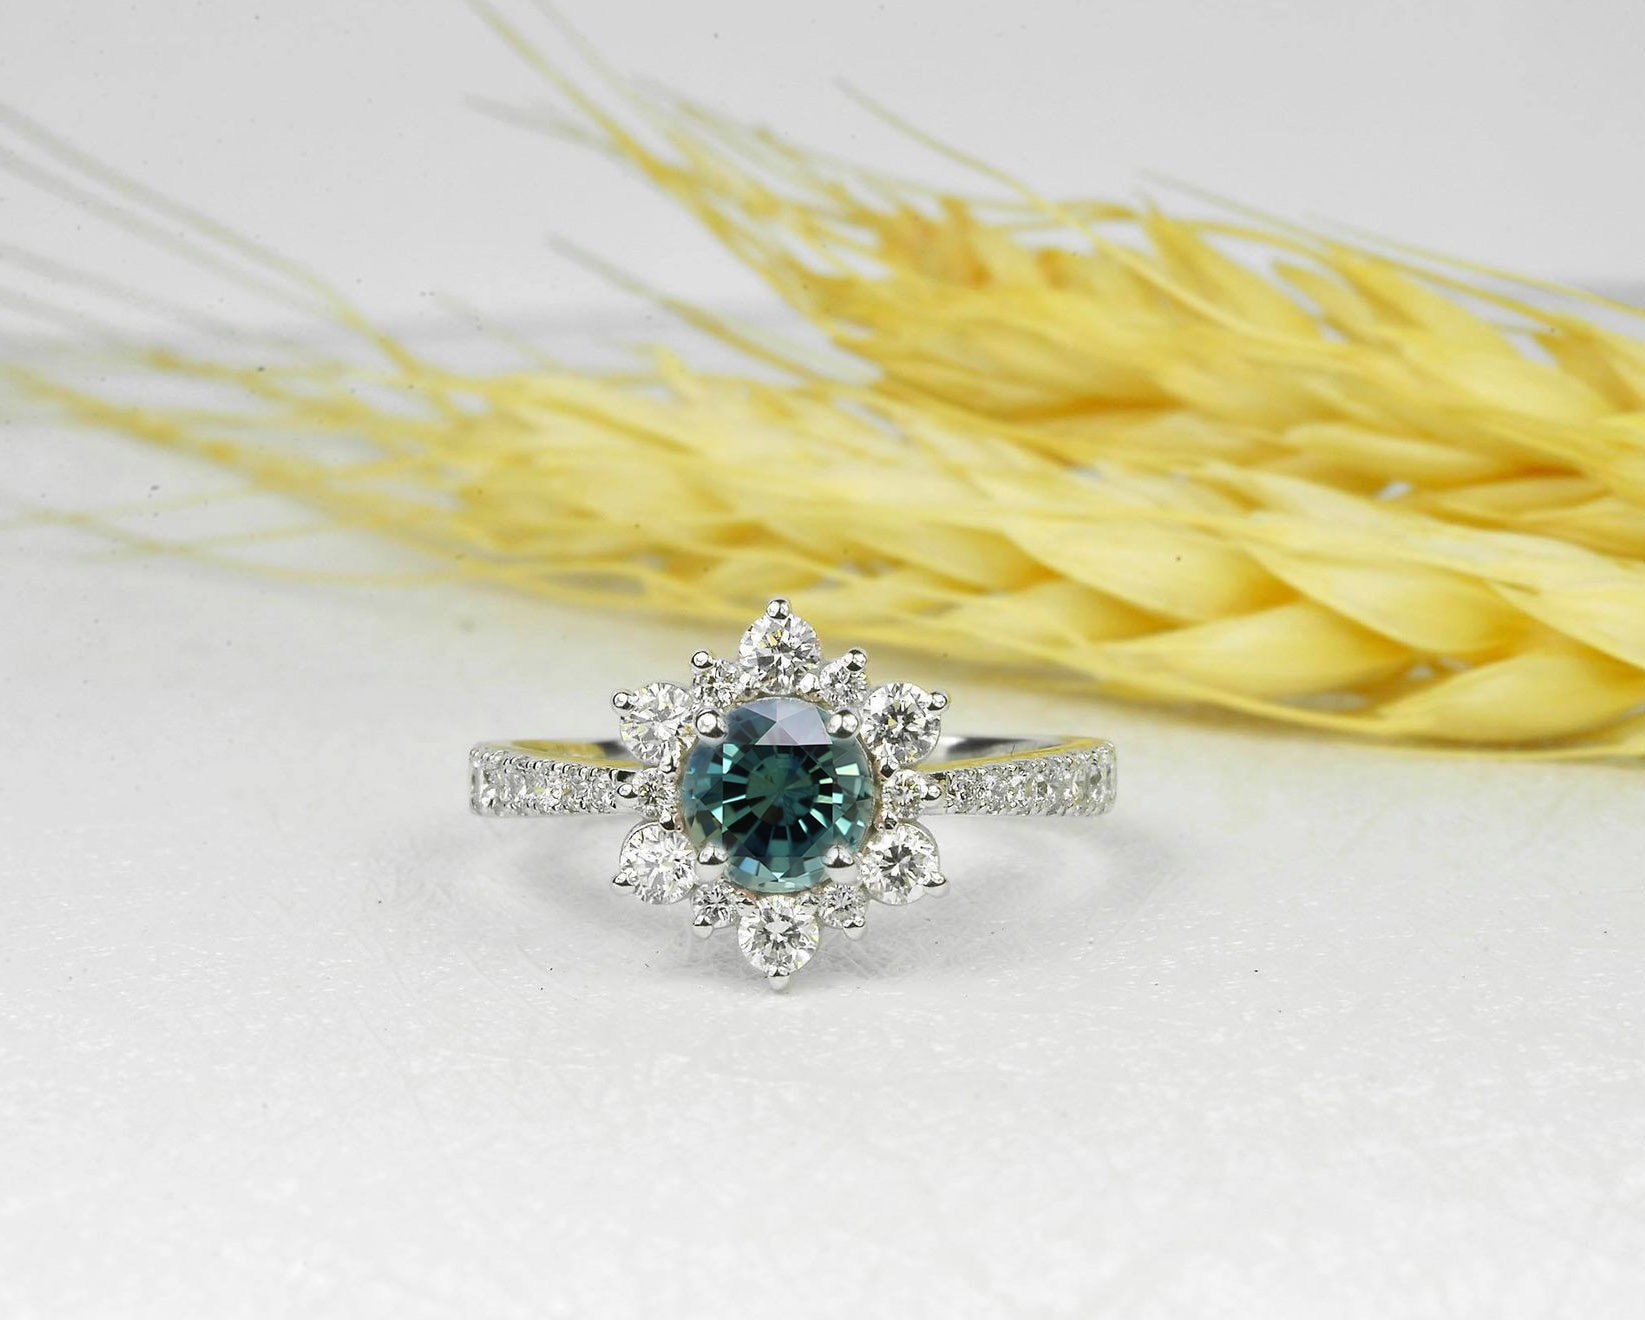 Teal Sapphire Engagement Ring | & Diamond Cluster White Gold Vintage Ring Halo Anniversary Unique Bridal